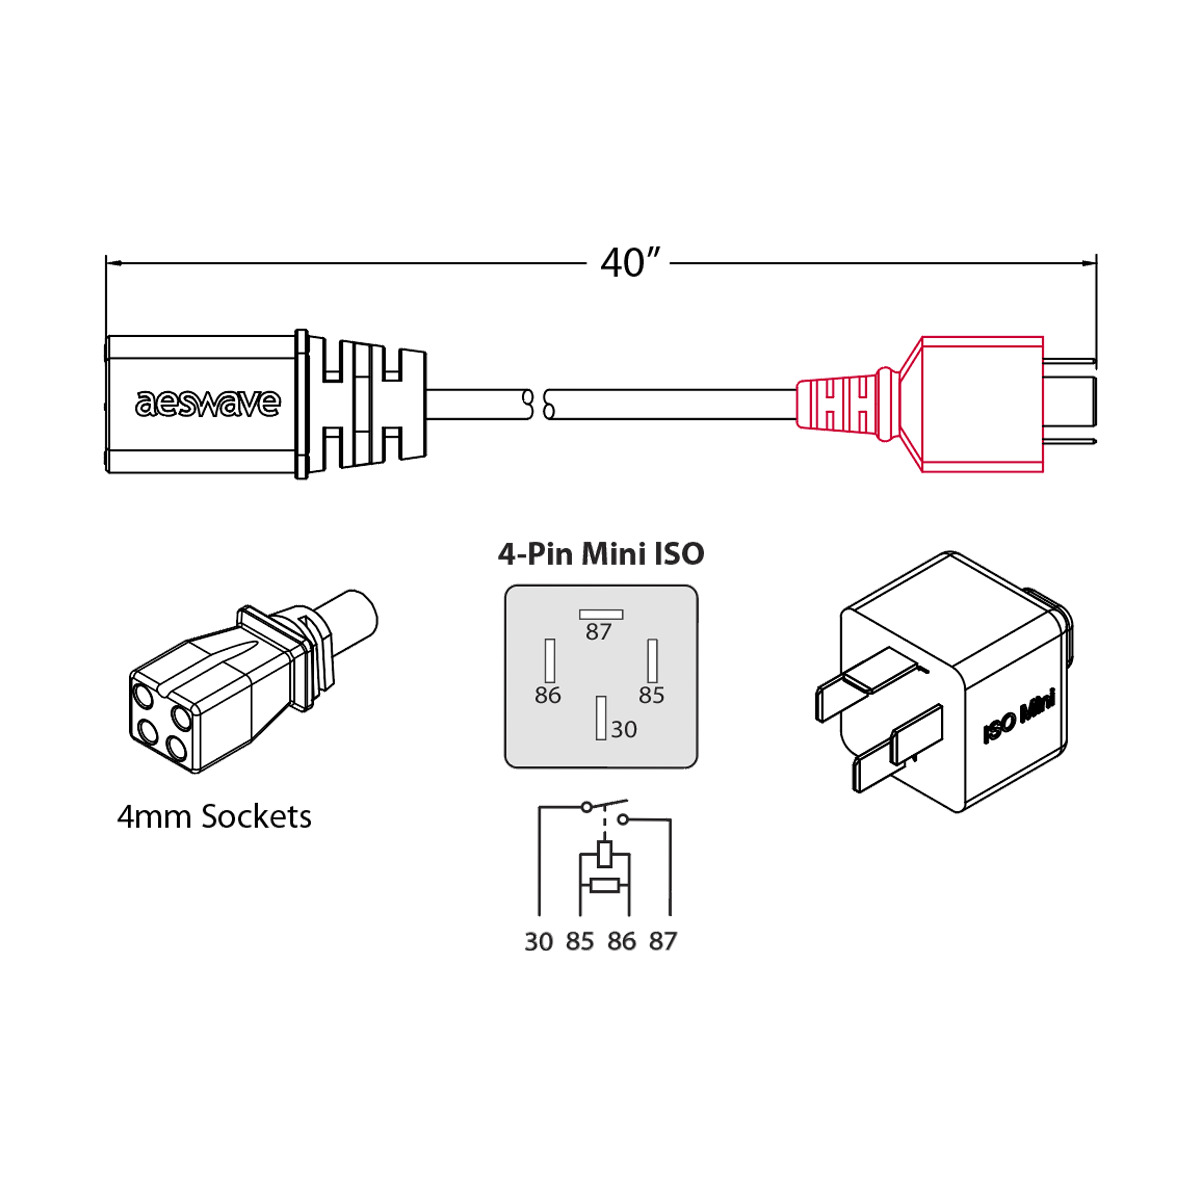 uActivate® 4-Pin ISO Mini cable specifications